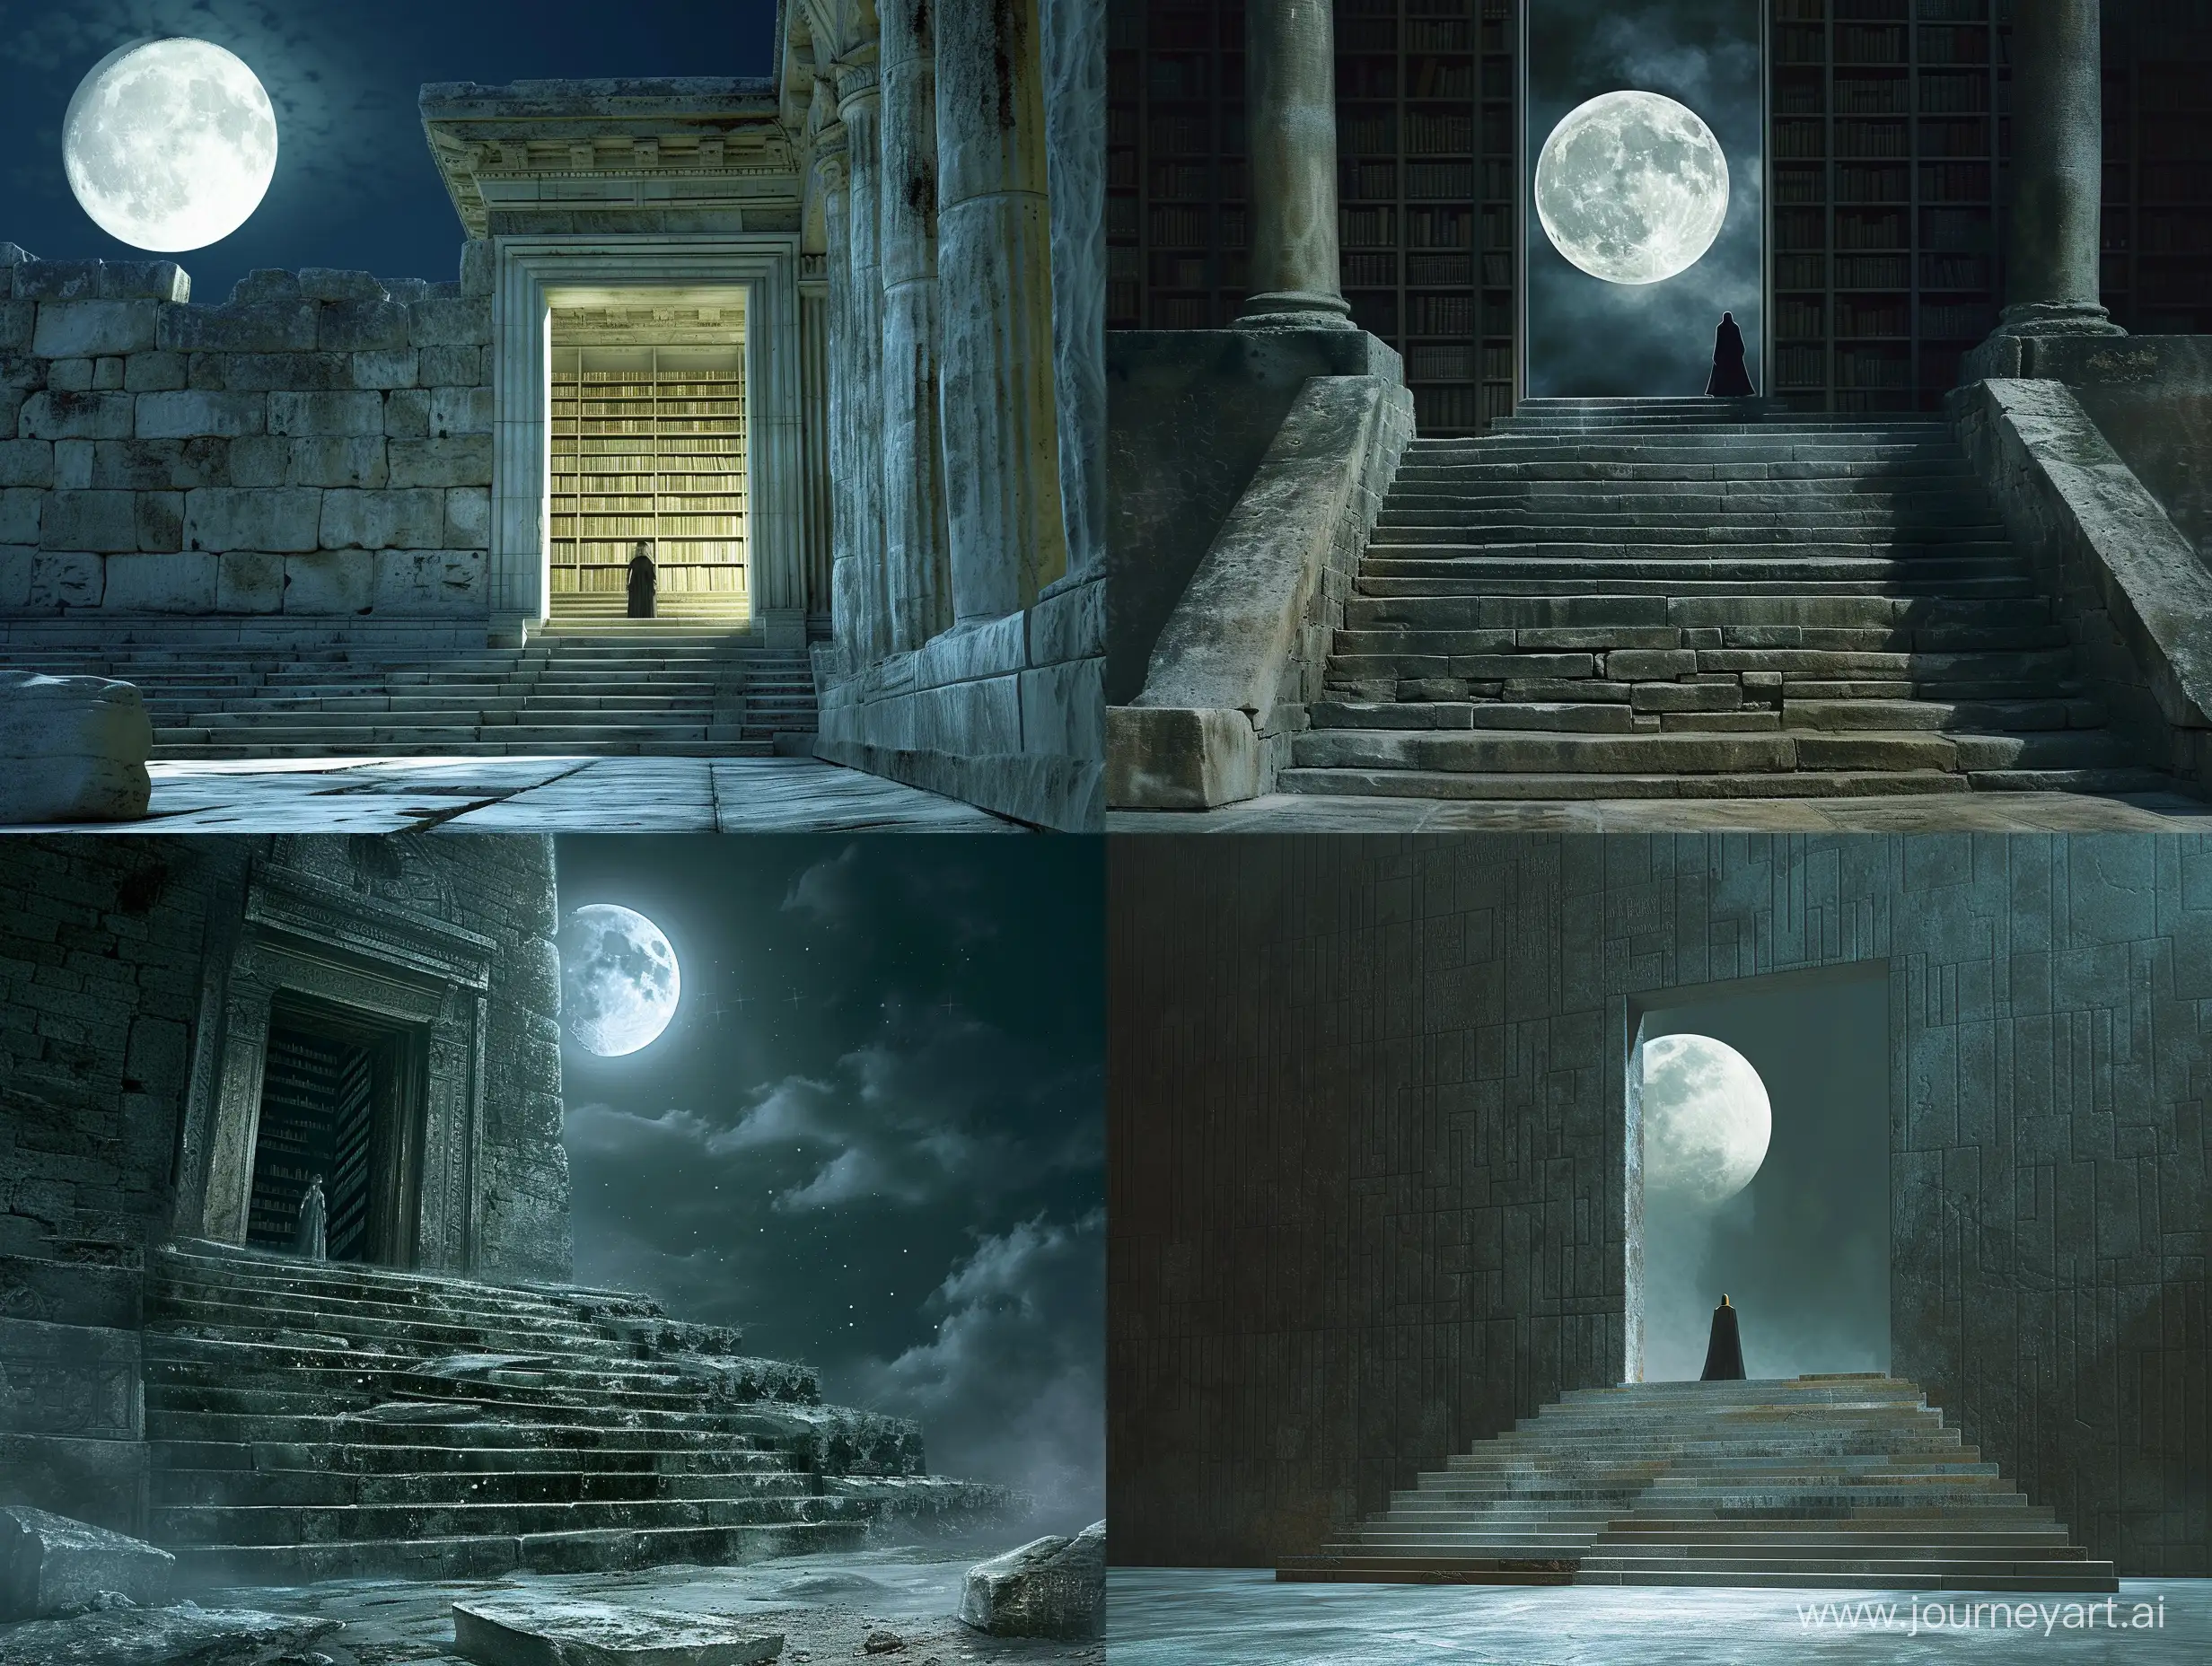 Enigmatic-Night-Quest-at-Legendary-Library-Moonlit-Exploration-of-Ancient-Secrets